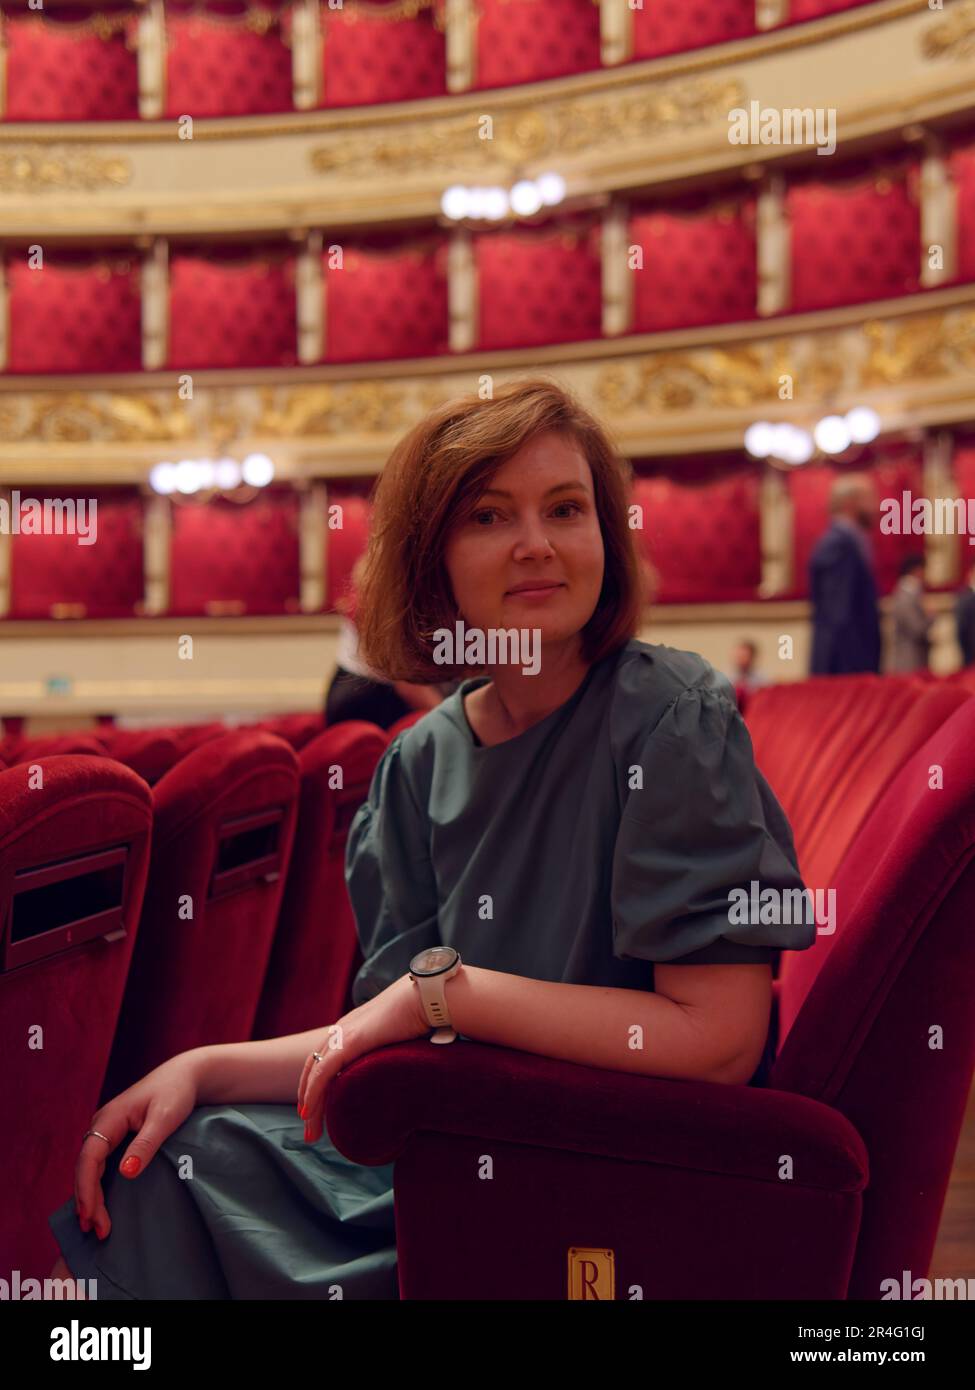 Pretyy lady in green outfit inside La Scala Opera House in Milan, Lombardy, Italy Stock Photo